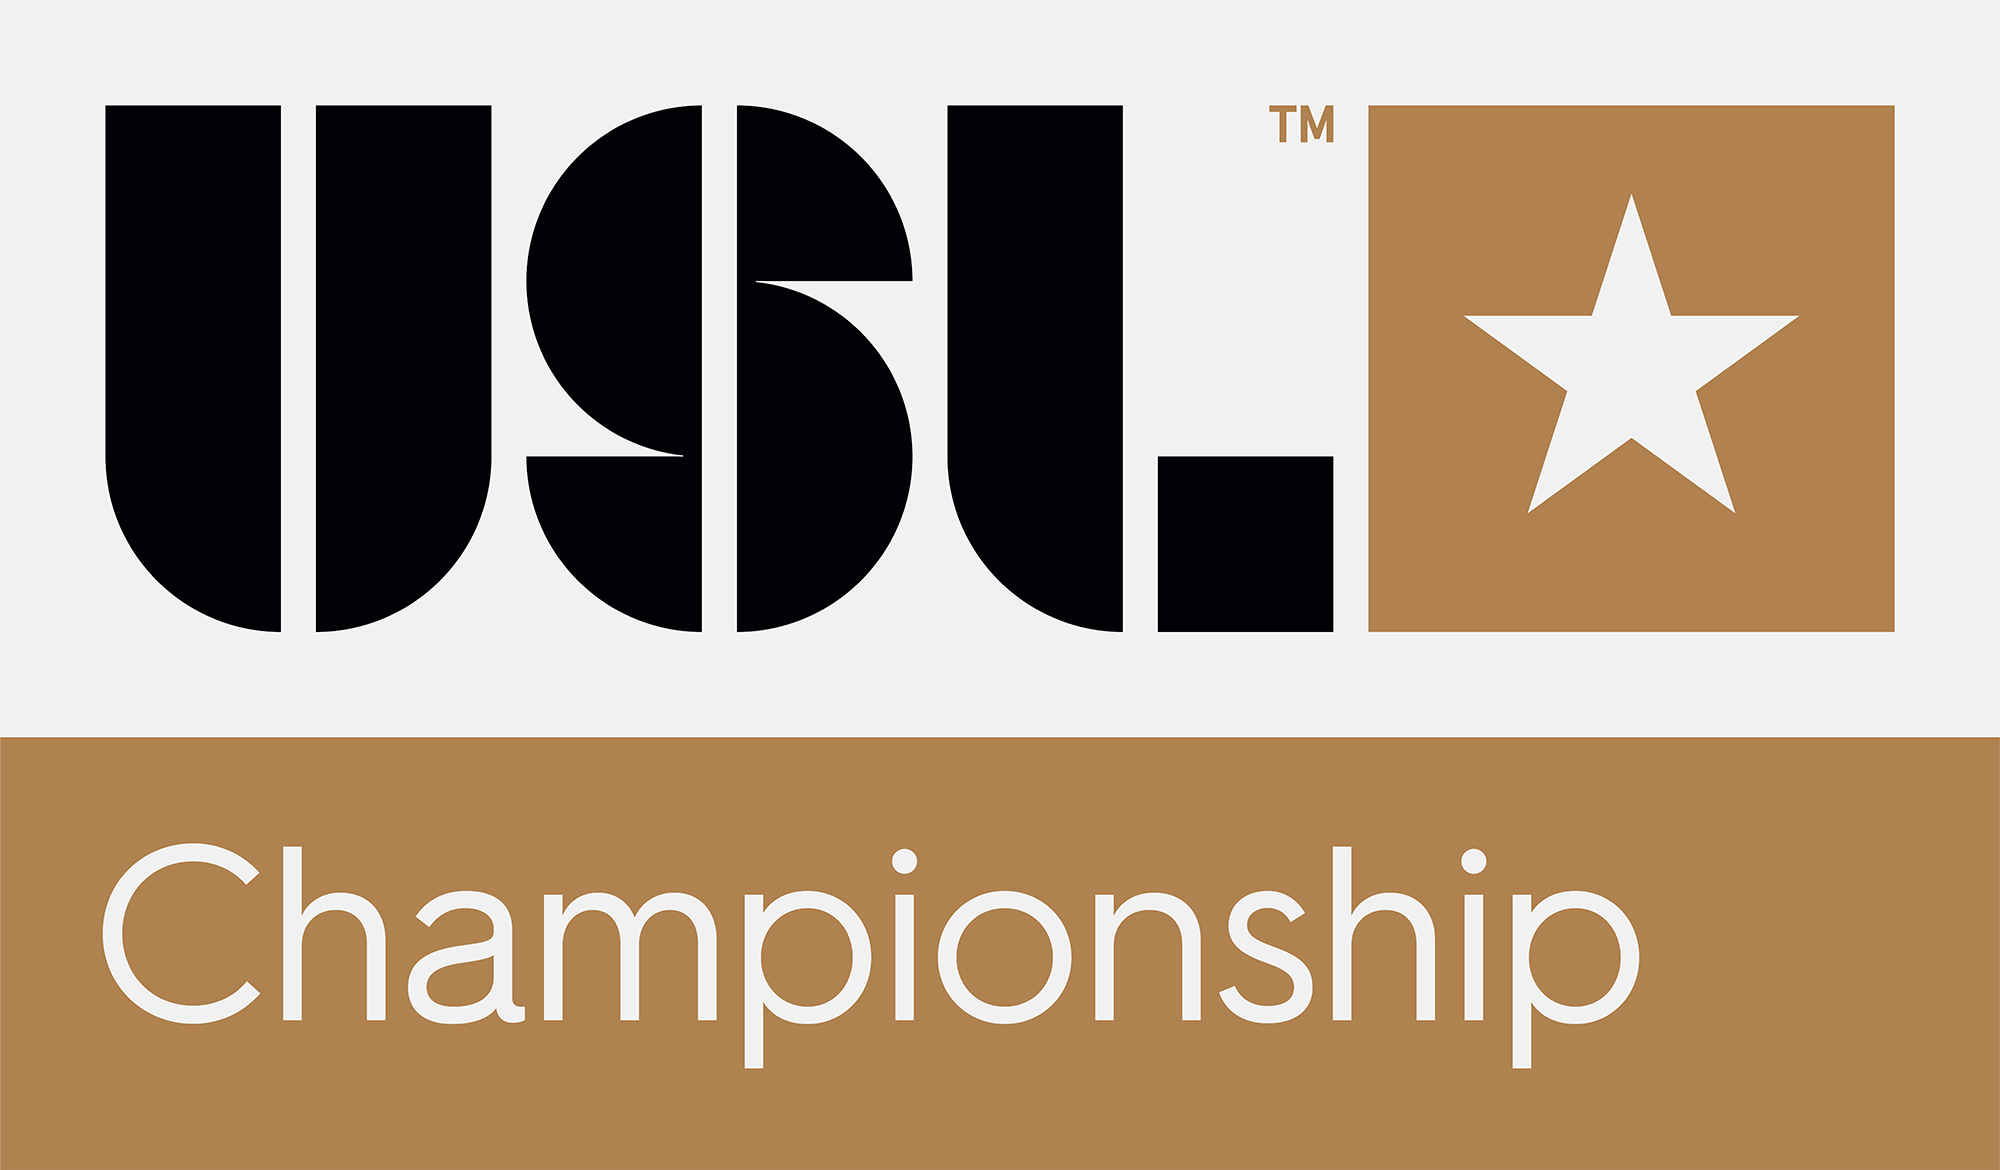 New Logo System for USL by Athletics and In-house